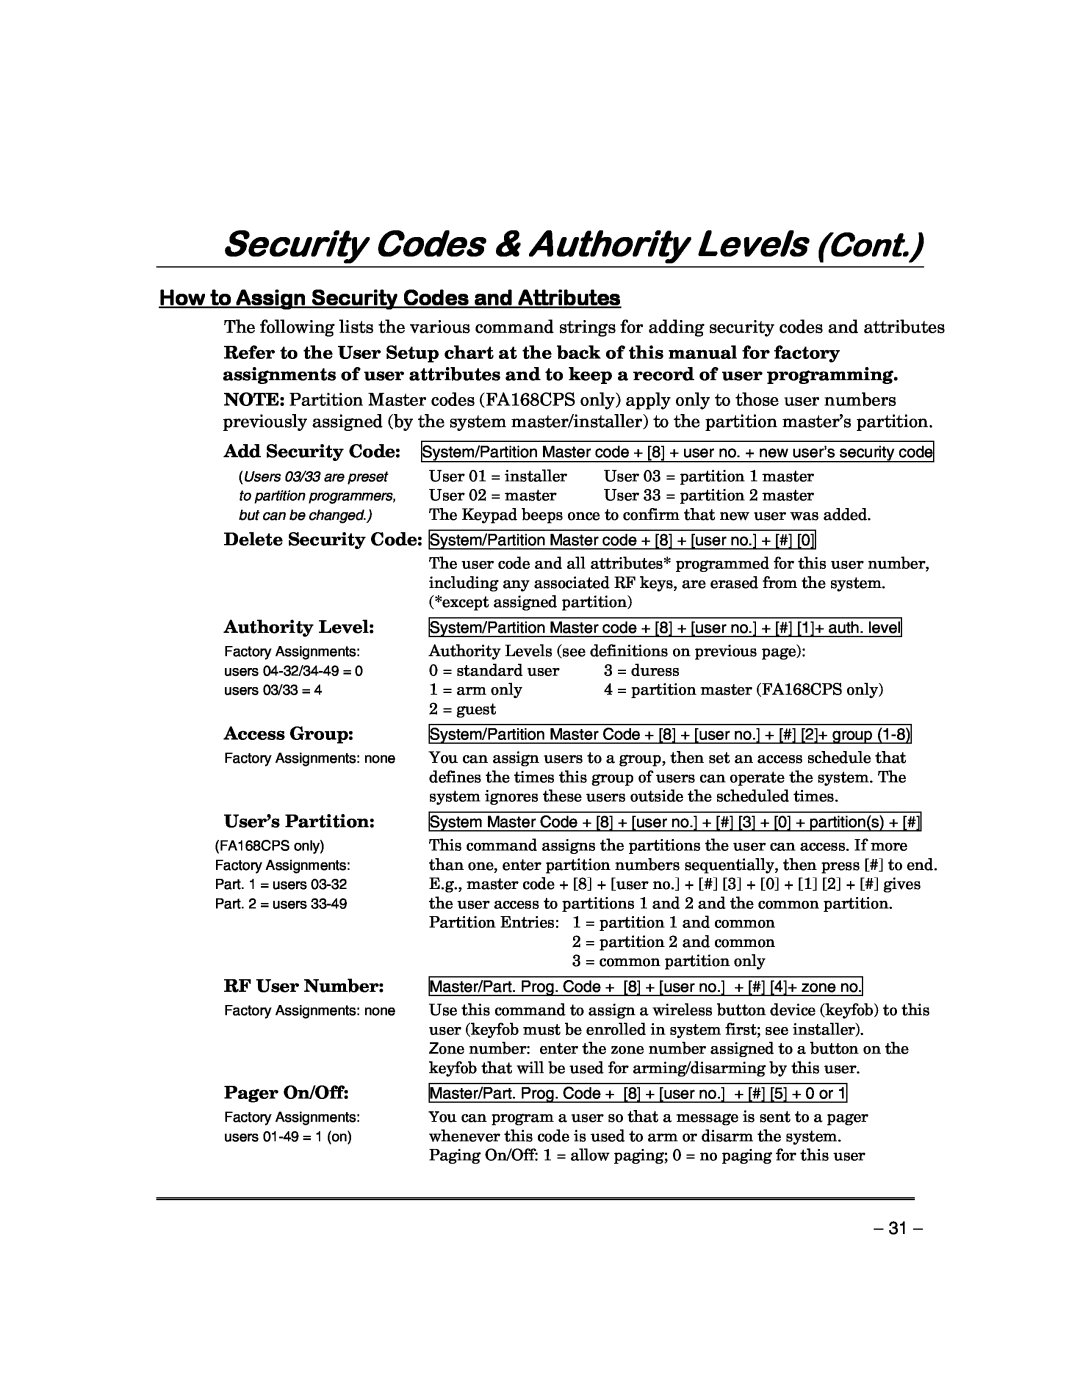 First Alert FA168CPSSIA, FA148CPSIA Security Codes & Authority Levels Cont, How to Assign Security Codes and Attributes 